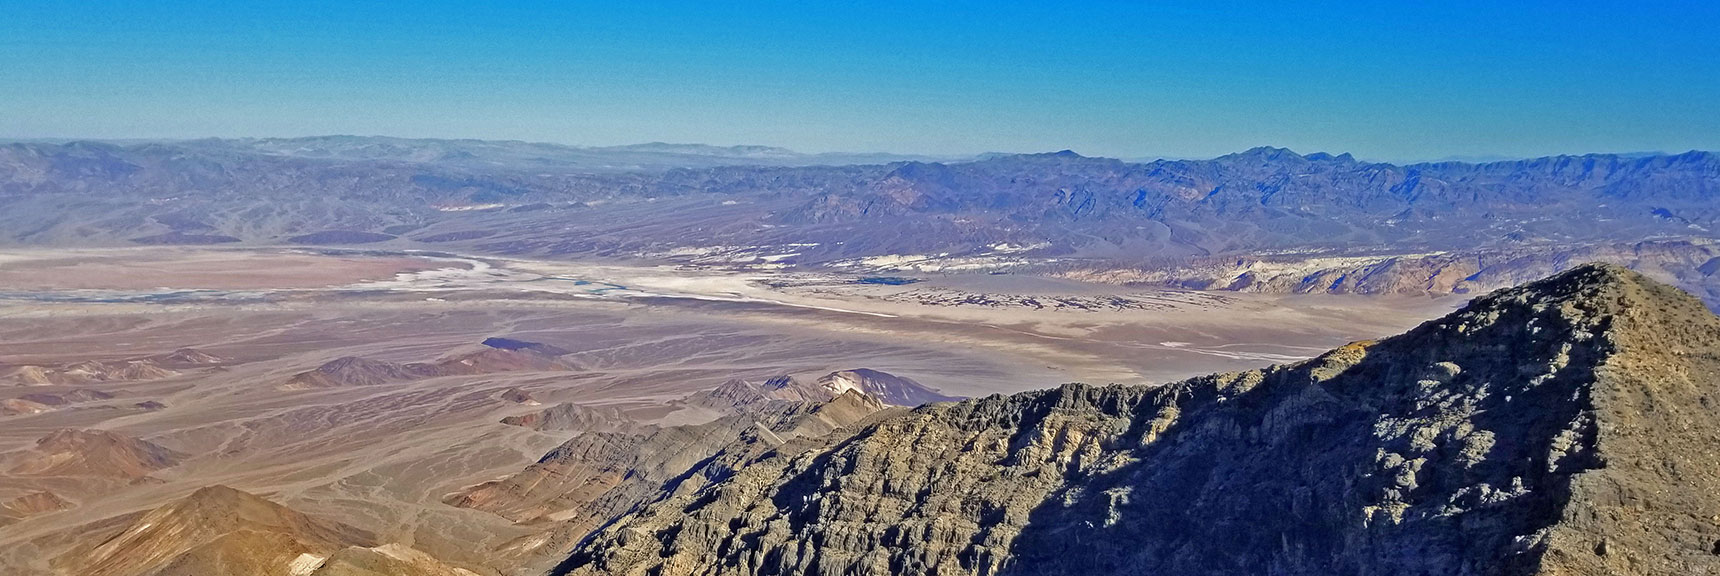 View Toward Furnace Creek Ranch and The Inn at Death Valley | Aguereberry Point | Panamint Mountain Range | Death Valley National Park, California